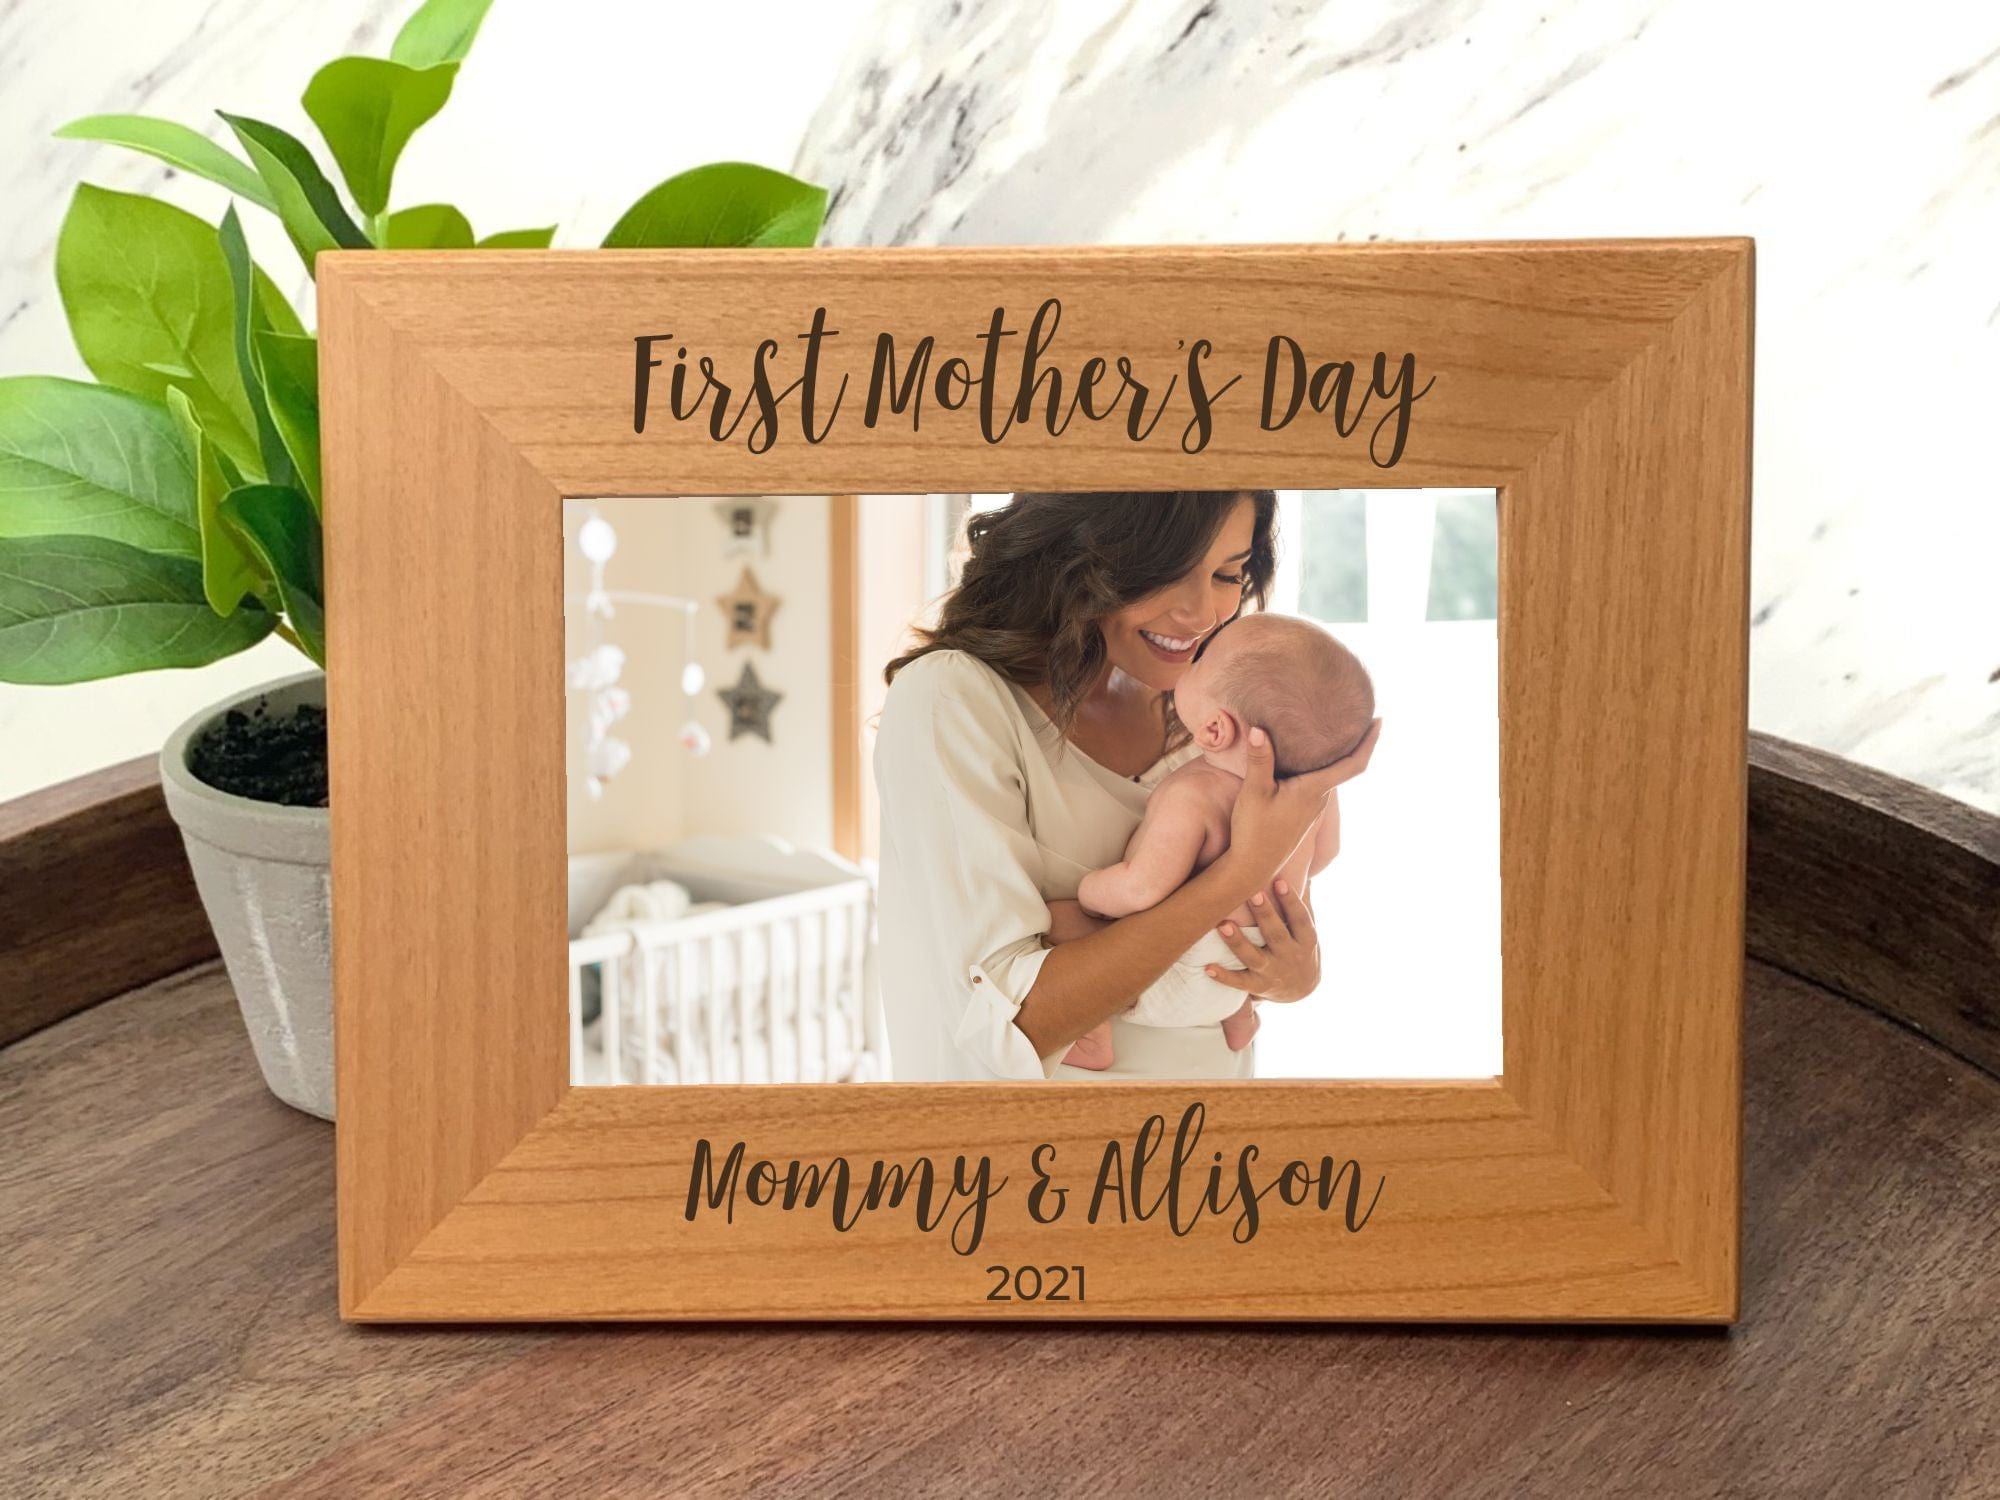 First mothers day frame